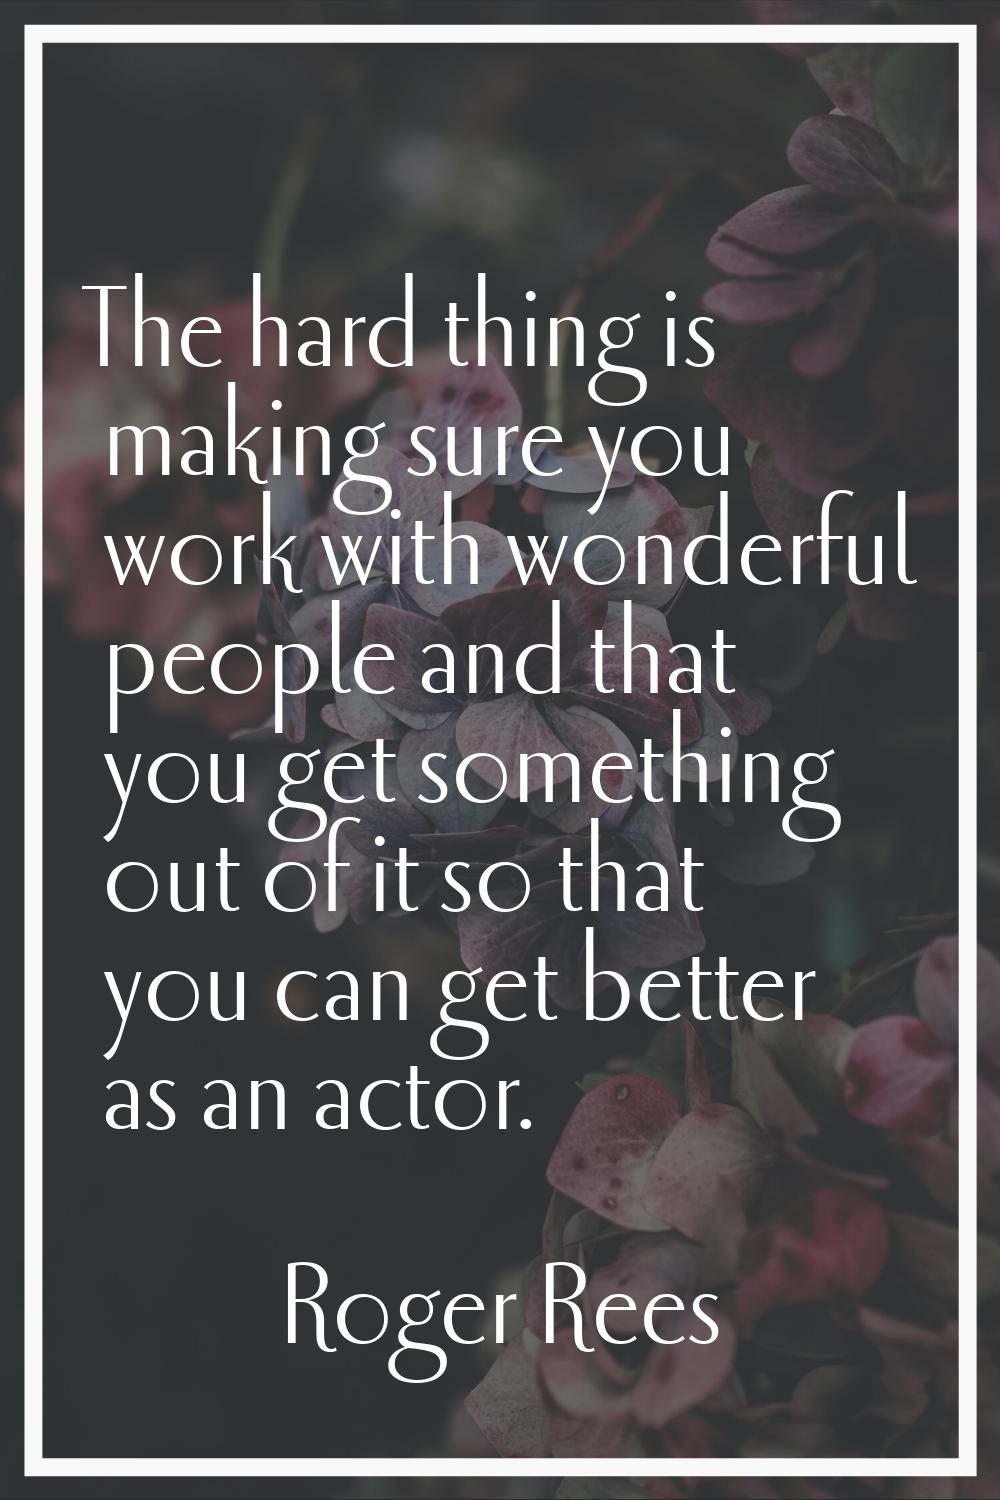 The hard thing is making sure you work with wonderful people and that you get something out of it s